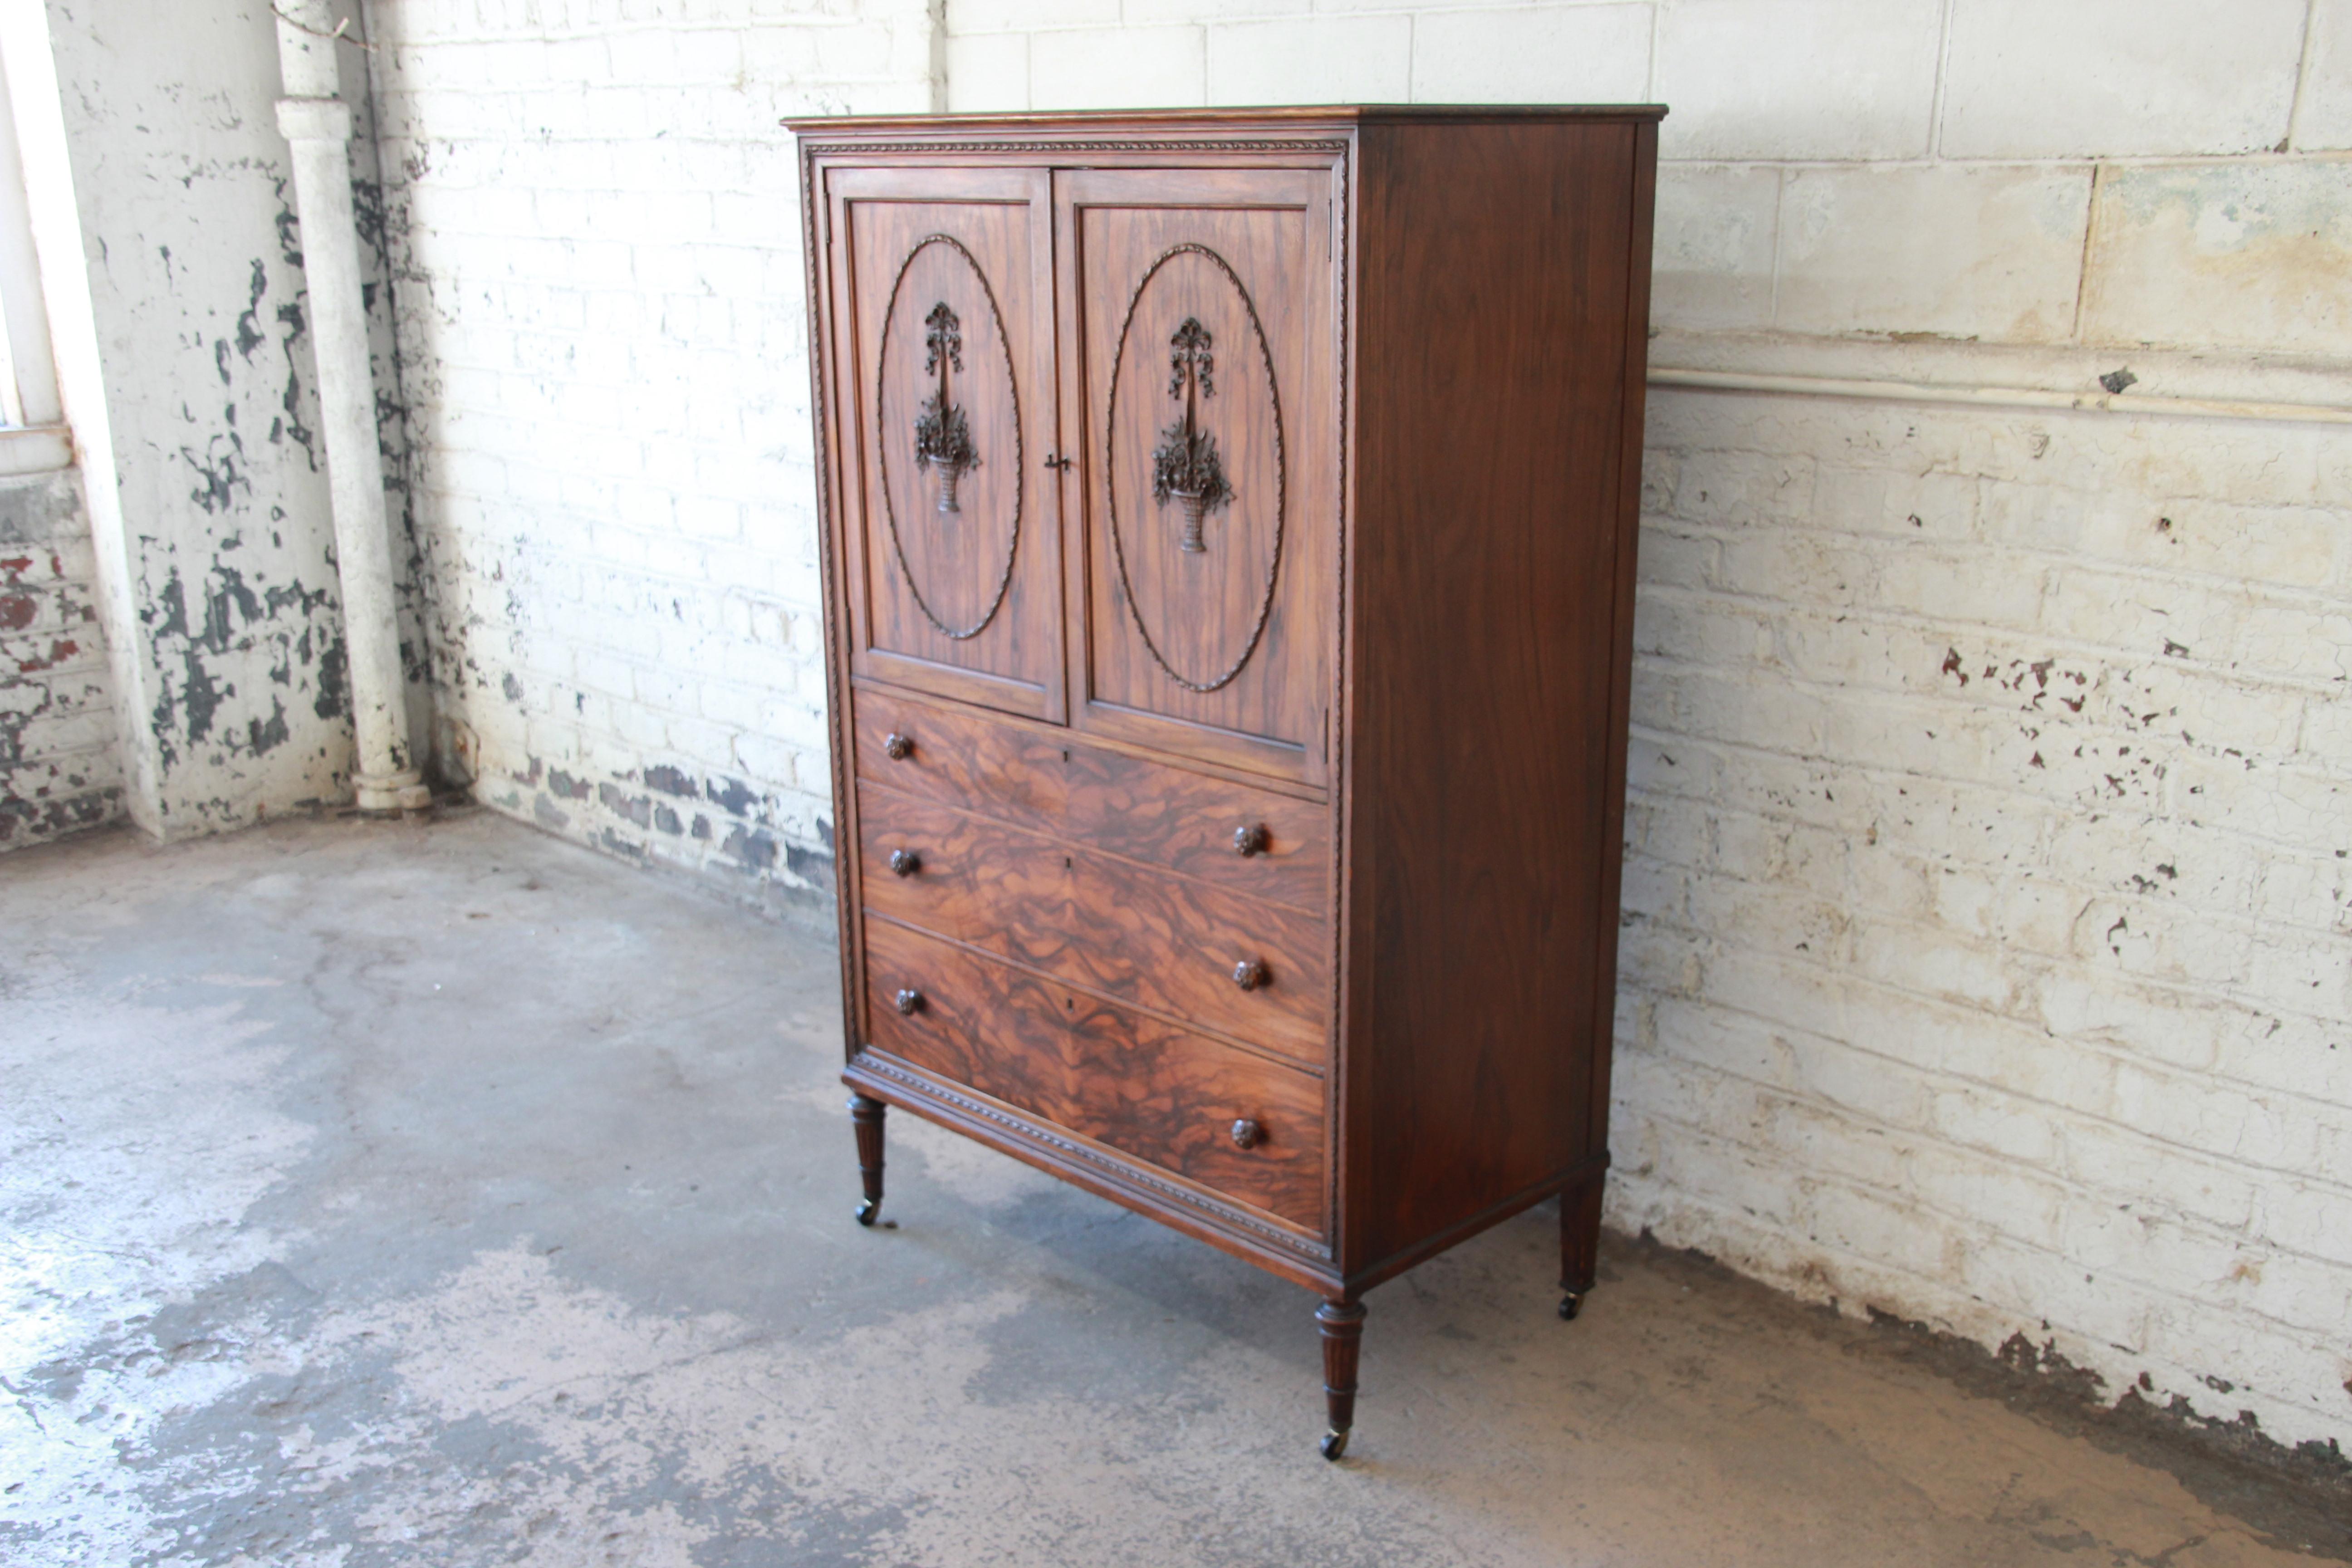 Offering a stunning antique rosewood French carved Chifferobe dresser or armoire. The piece has two large cabinet doors with carved fruit basket details that open up to four large drawers for storage. Each drawer has a nice rosewood grain and offers